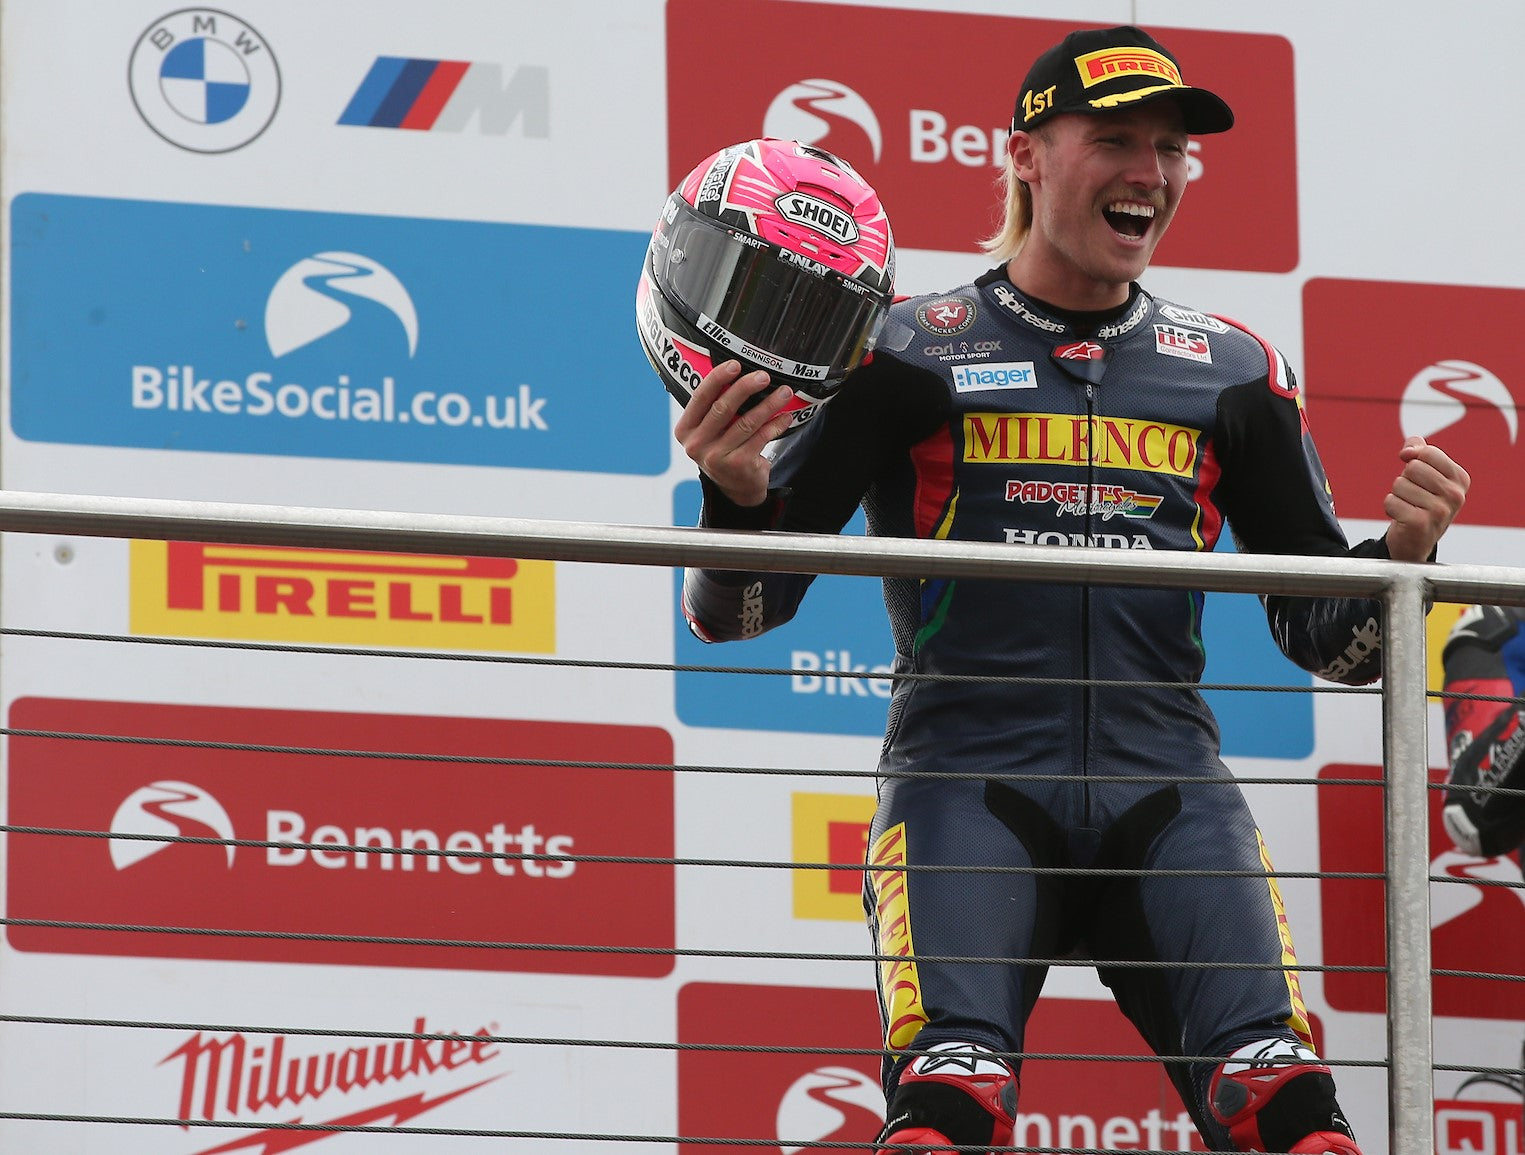 DAVEY TODD CAPS SUCCESSFUL SEASON ON SHORT TRACKS AND ROADS BY SEALING BRITISH NATIONAL SUPERSTOCK CHAMPIONSHIP WITH A WIN AT DONINGTON PARK